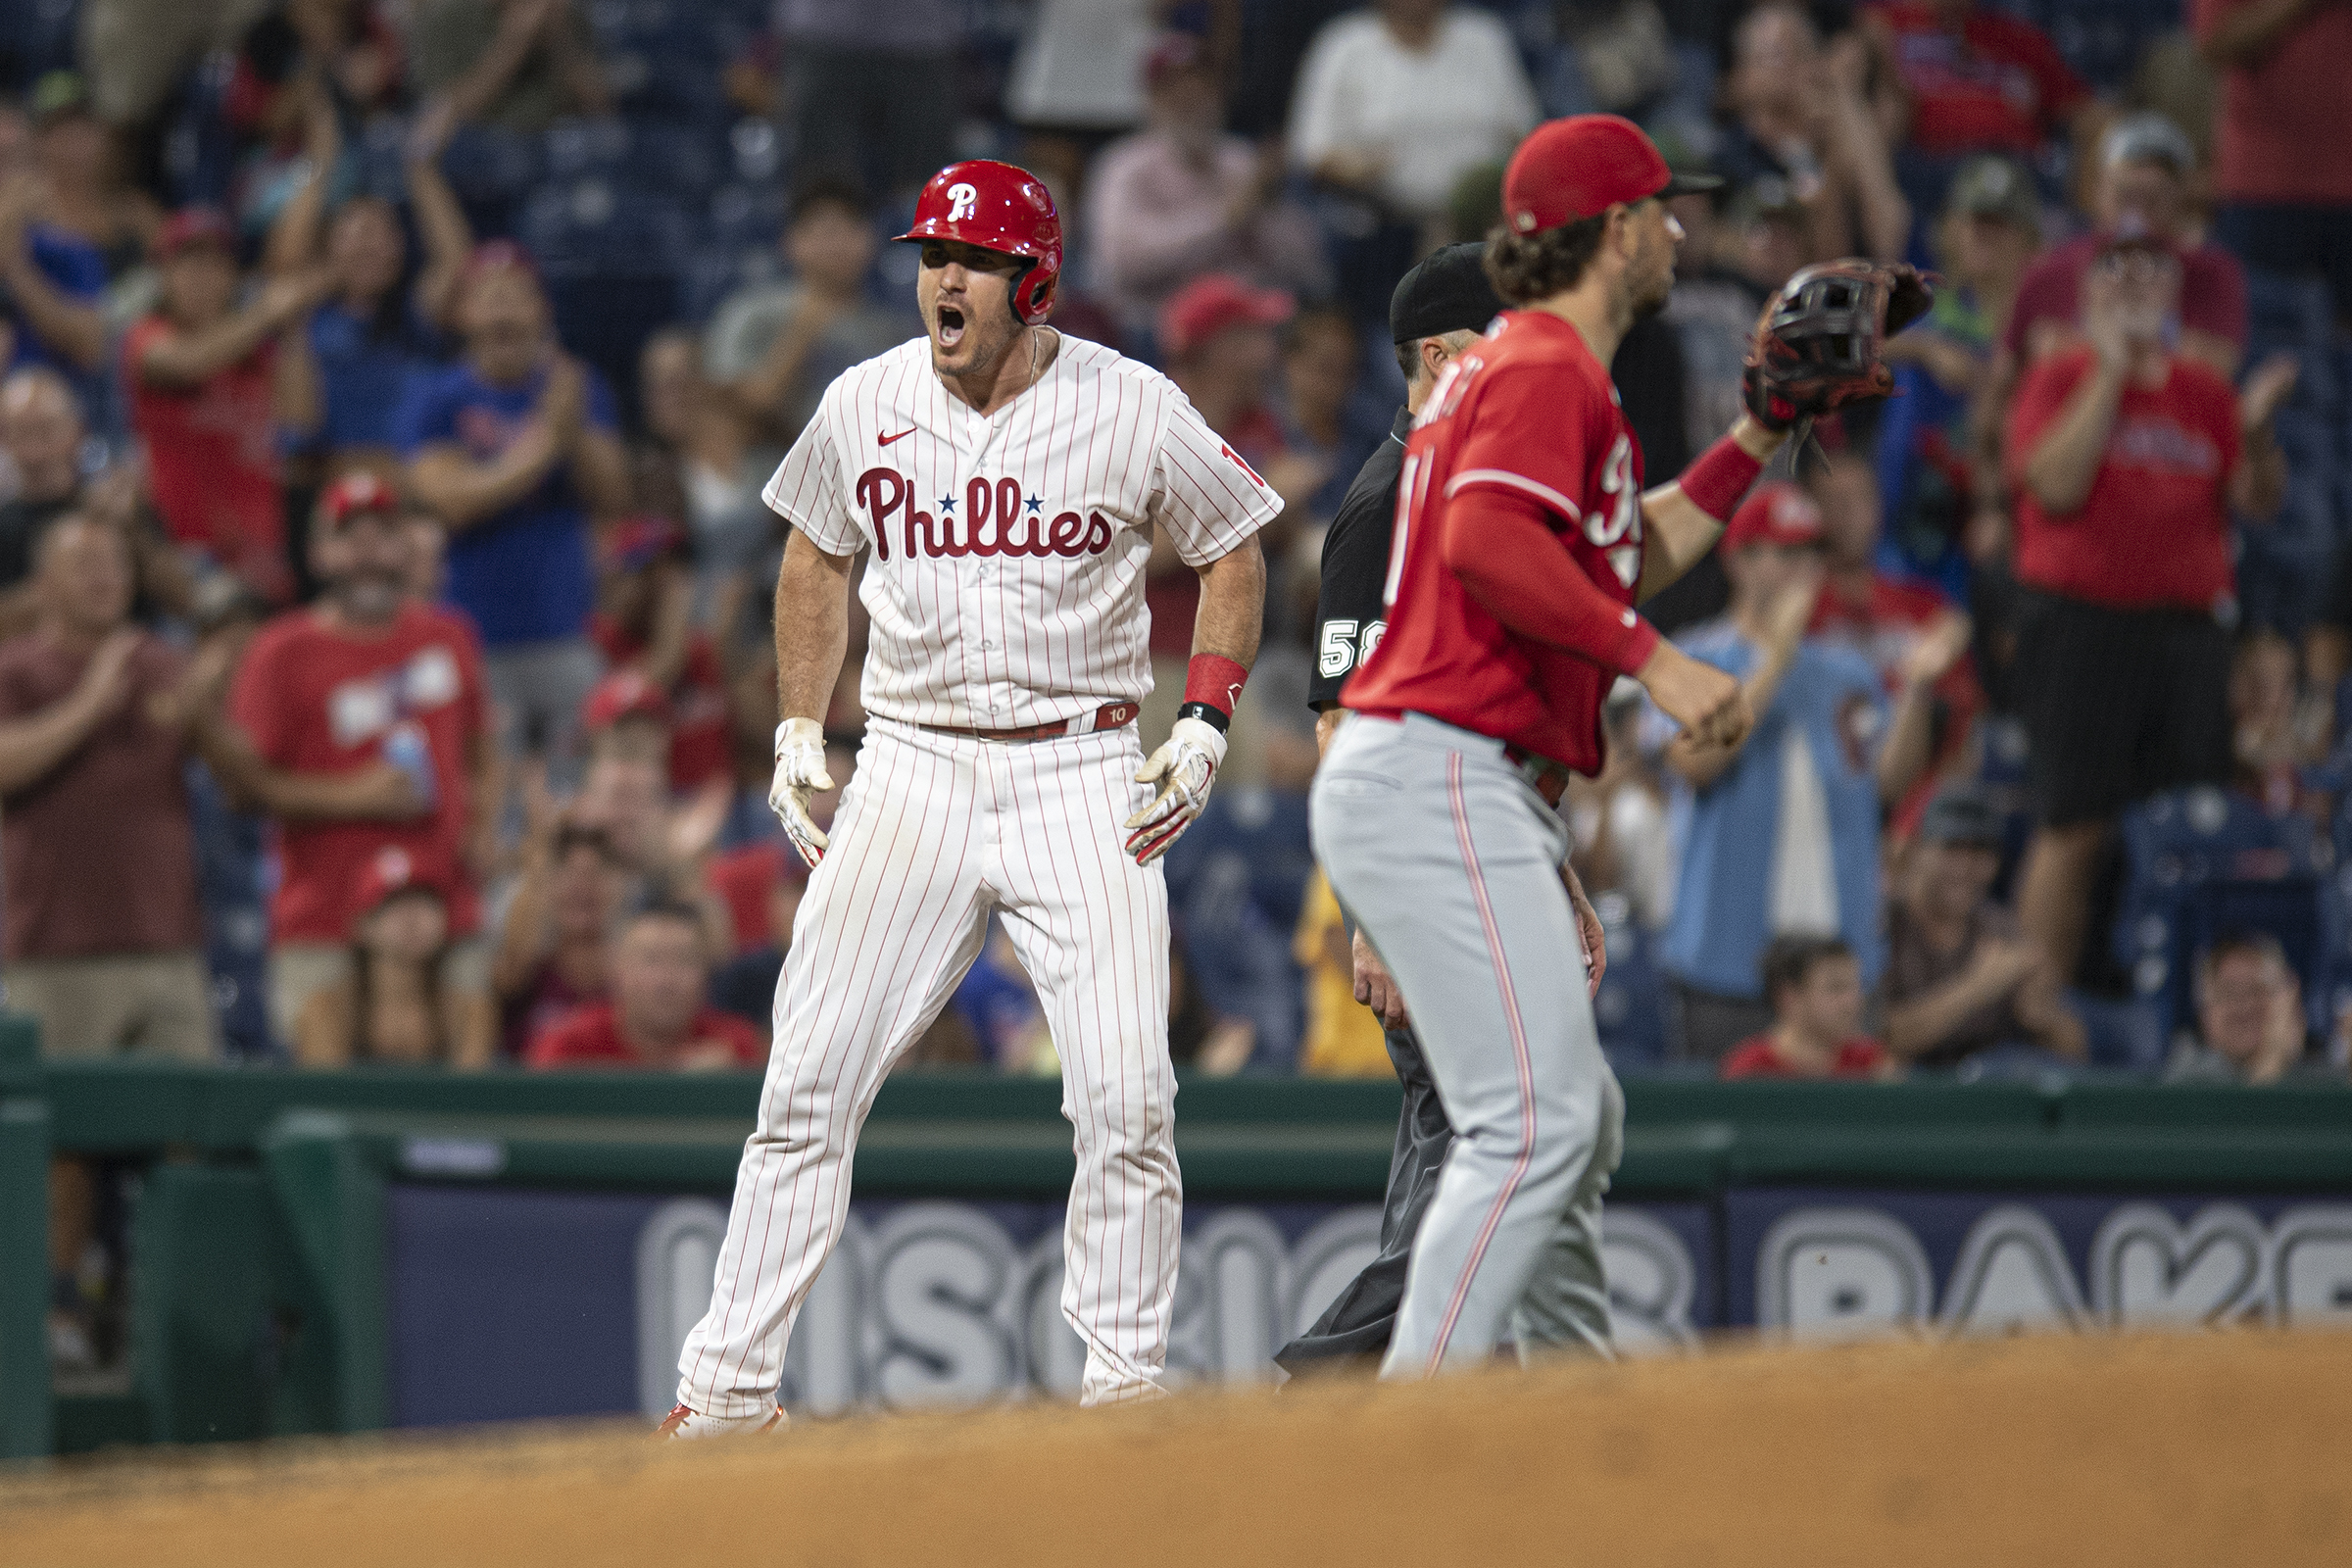 Phillies' J.T. Realmuto dominating the bases unlike any other MLB player